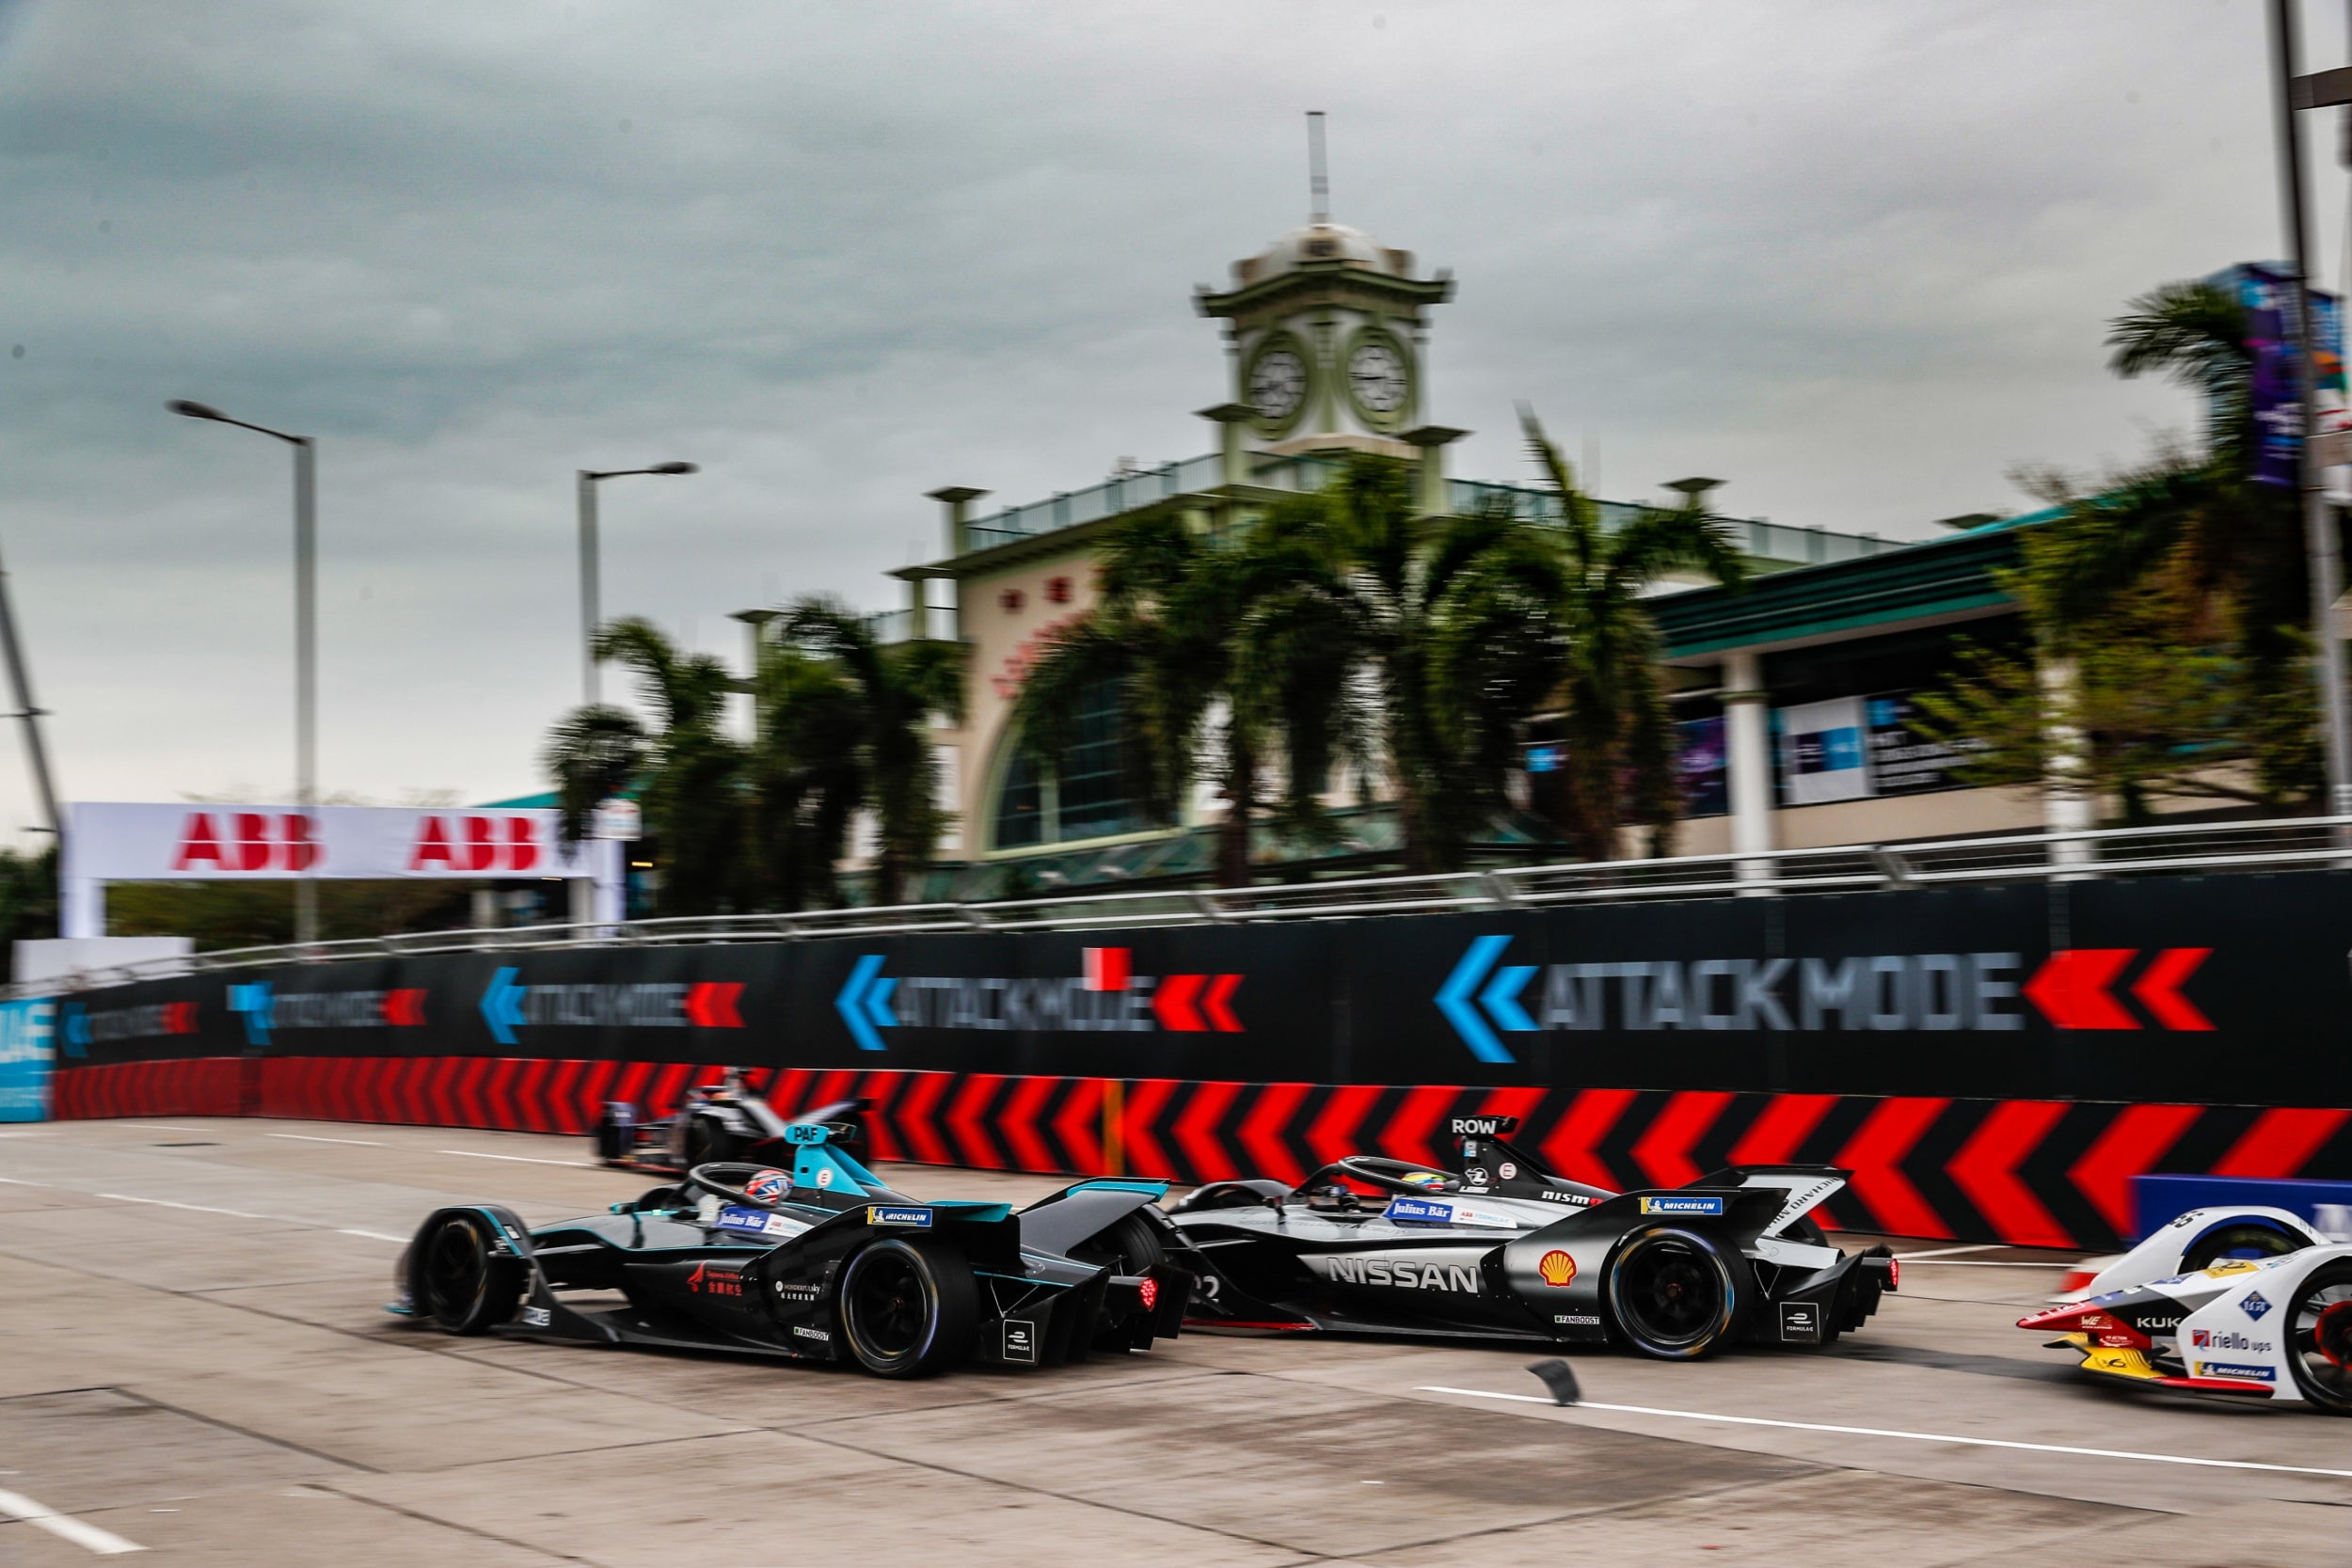 The Hong Kong E-Prix offered up another unpredictable and dramatic spectacle for fans